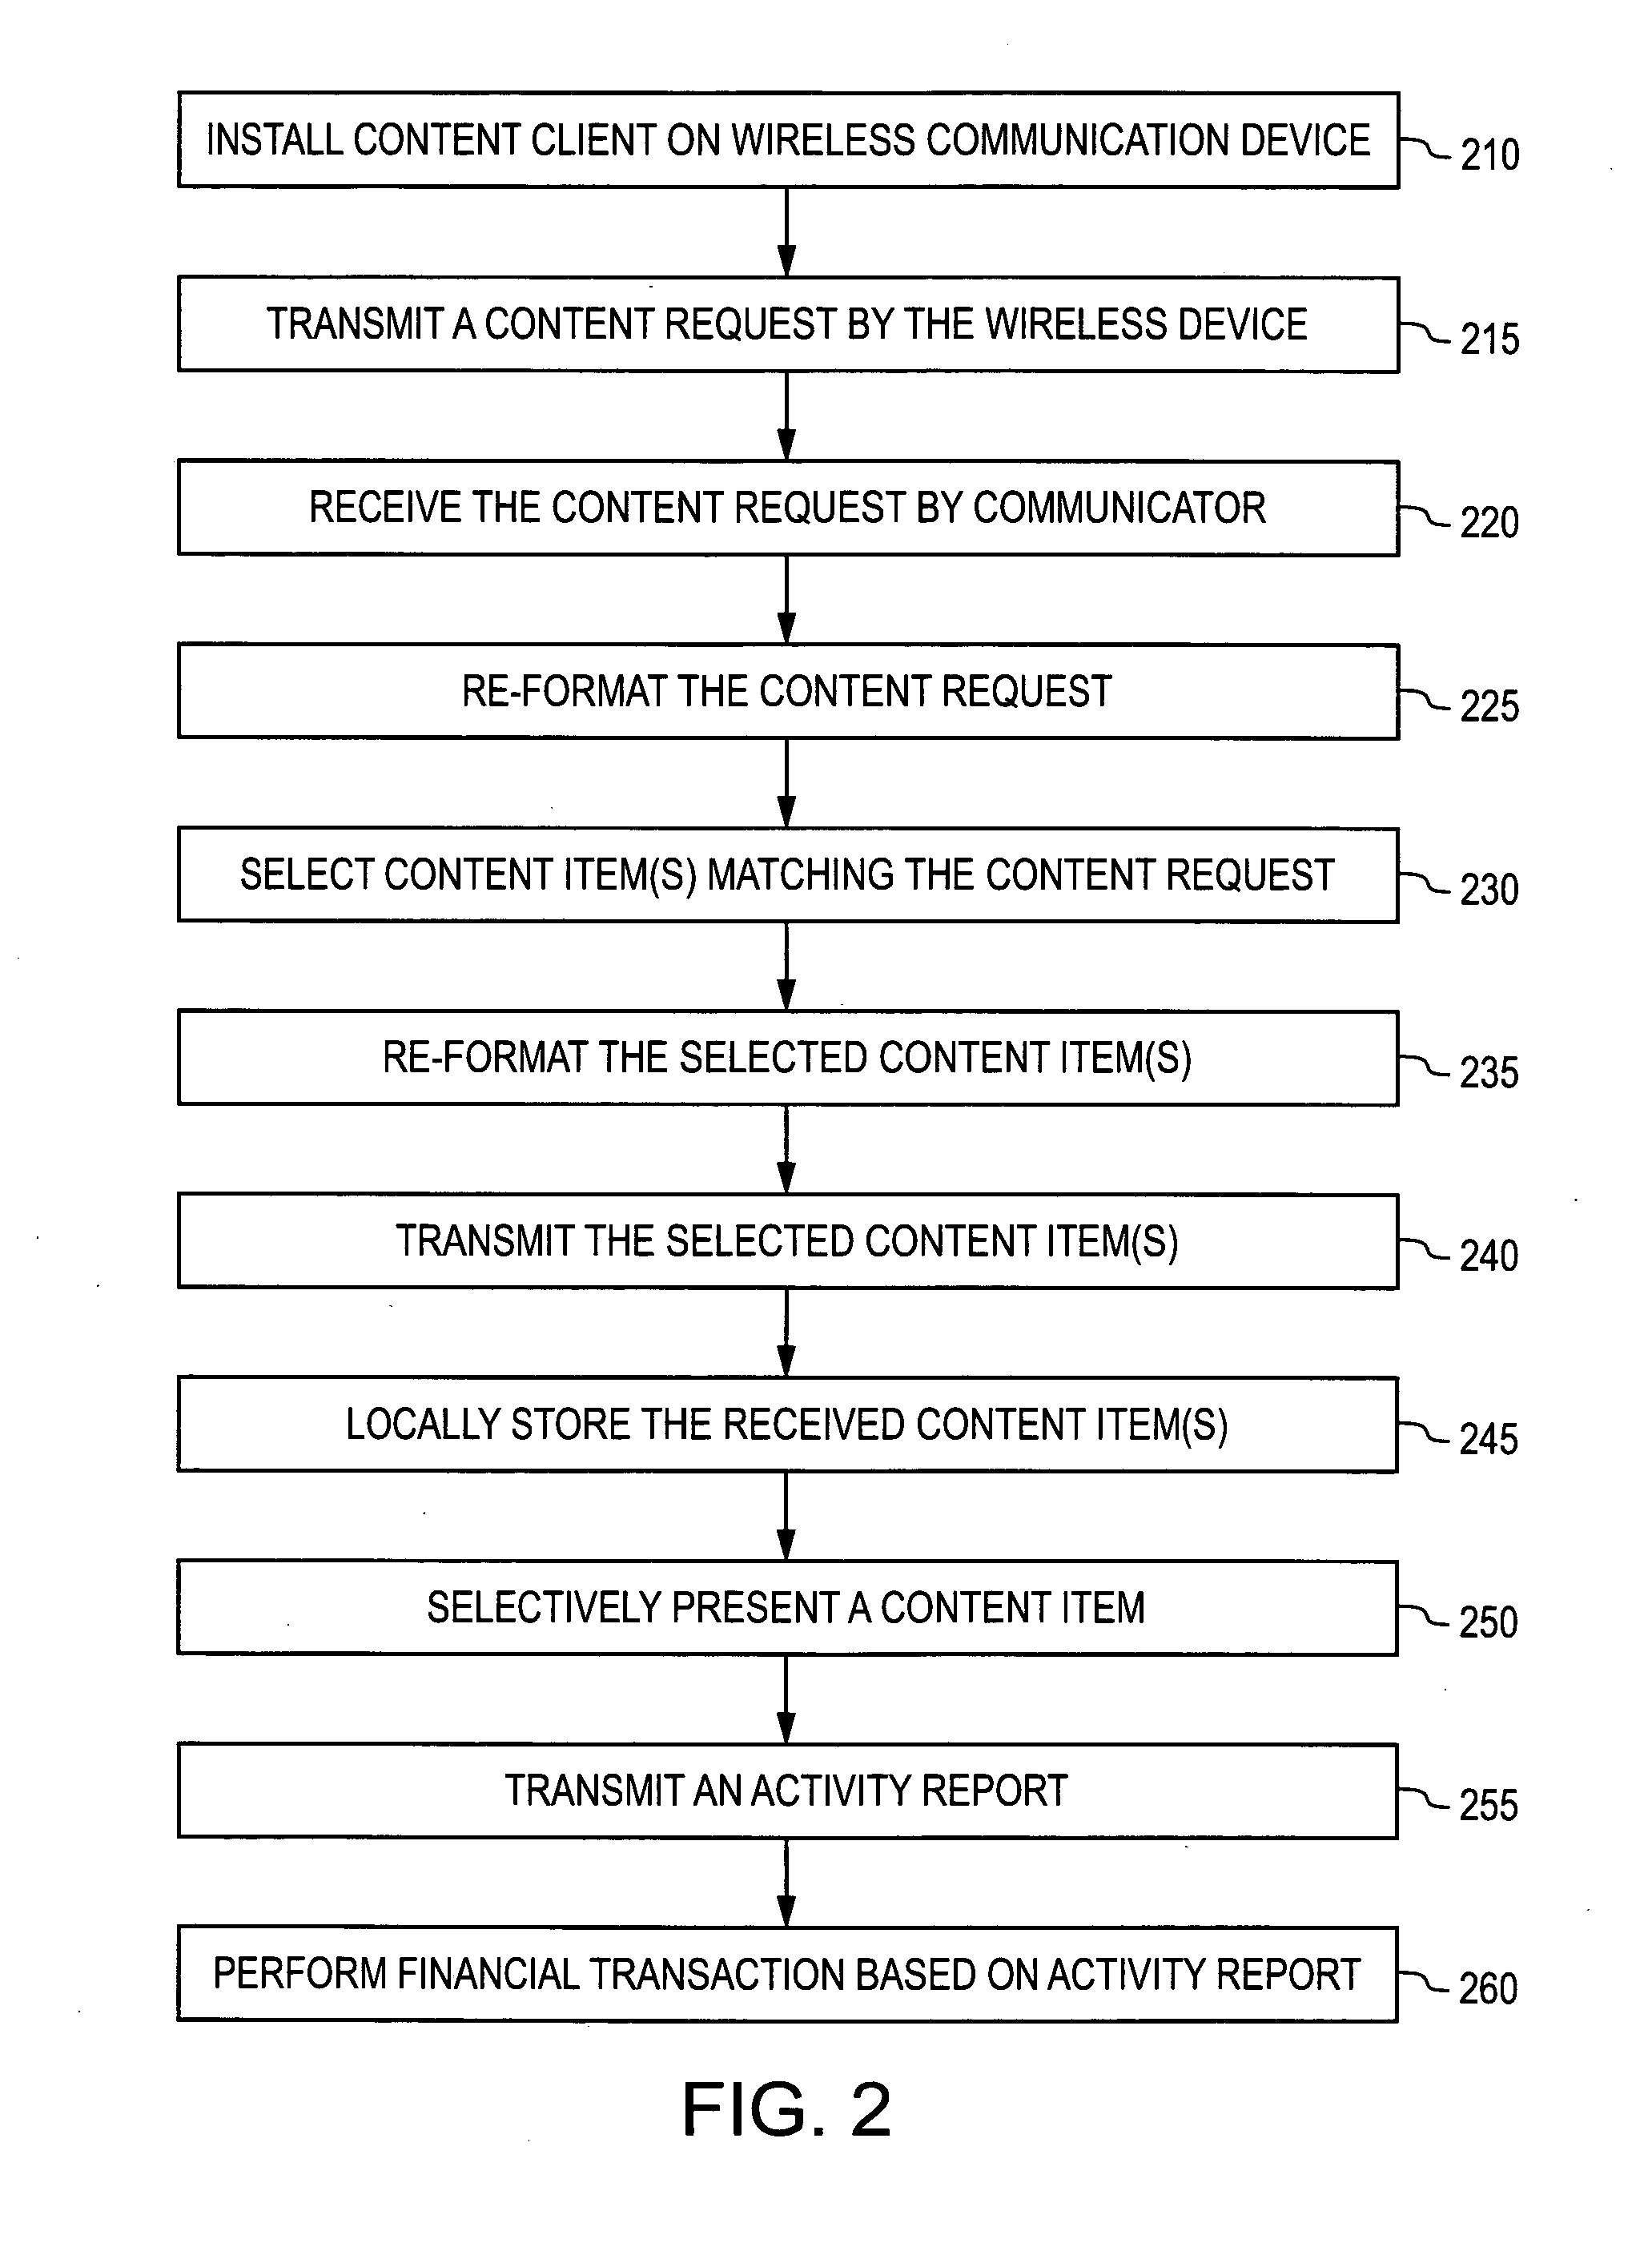 Device, system and method of wireless delivery of targeted advertisements